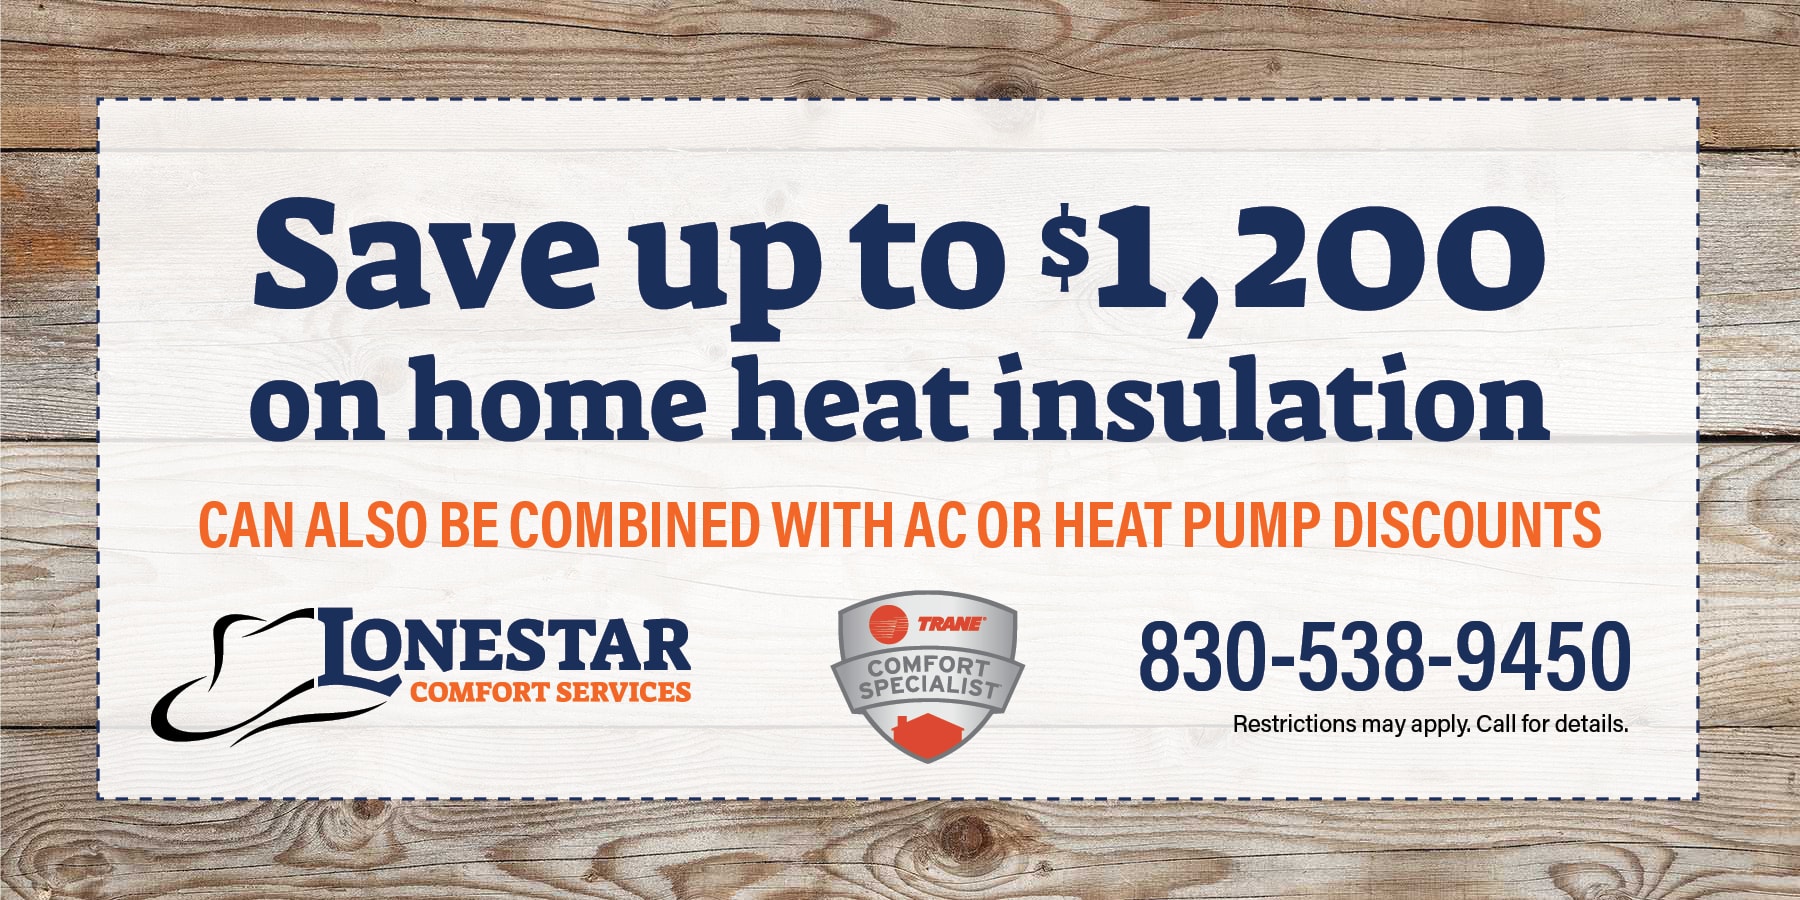 Save up to 00 on home heat insulation